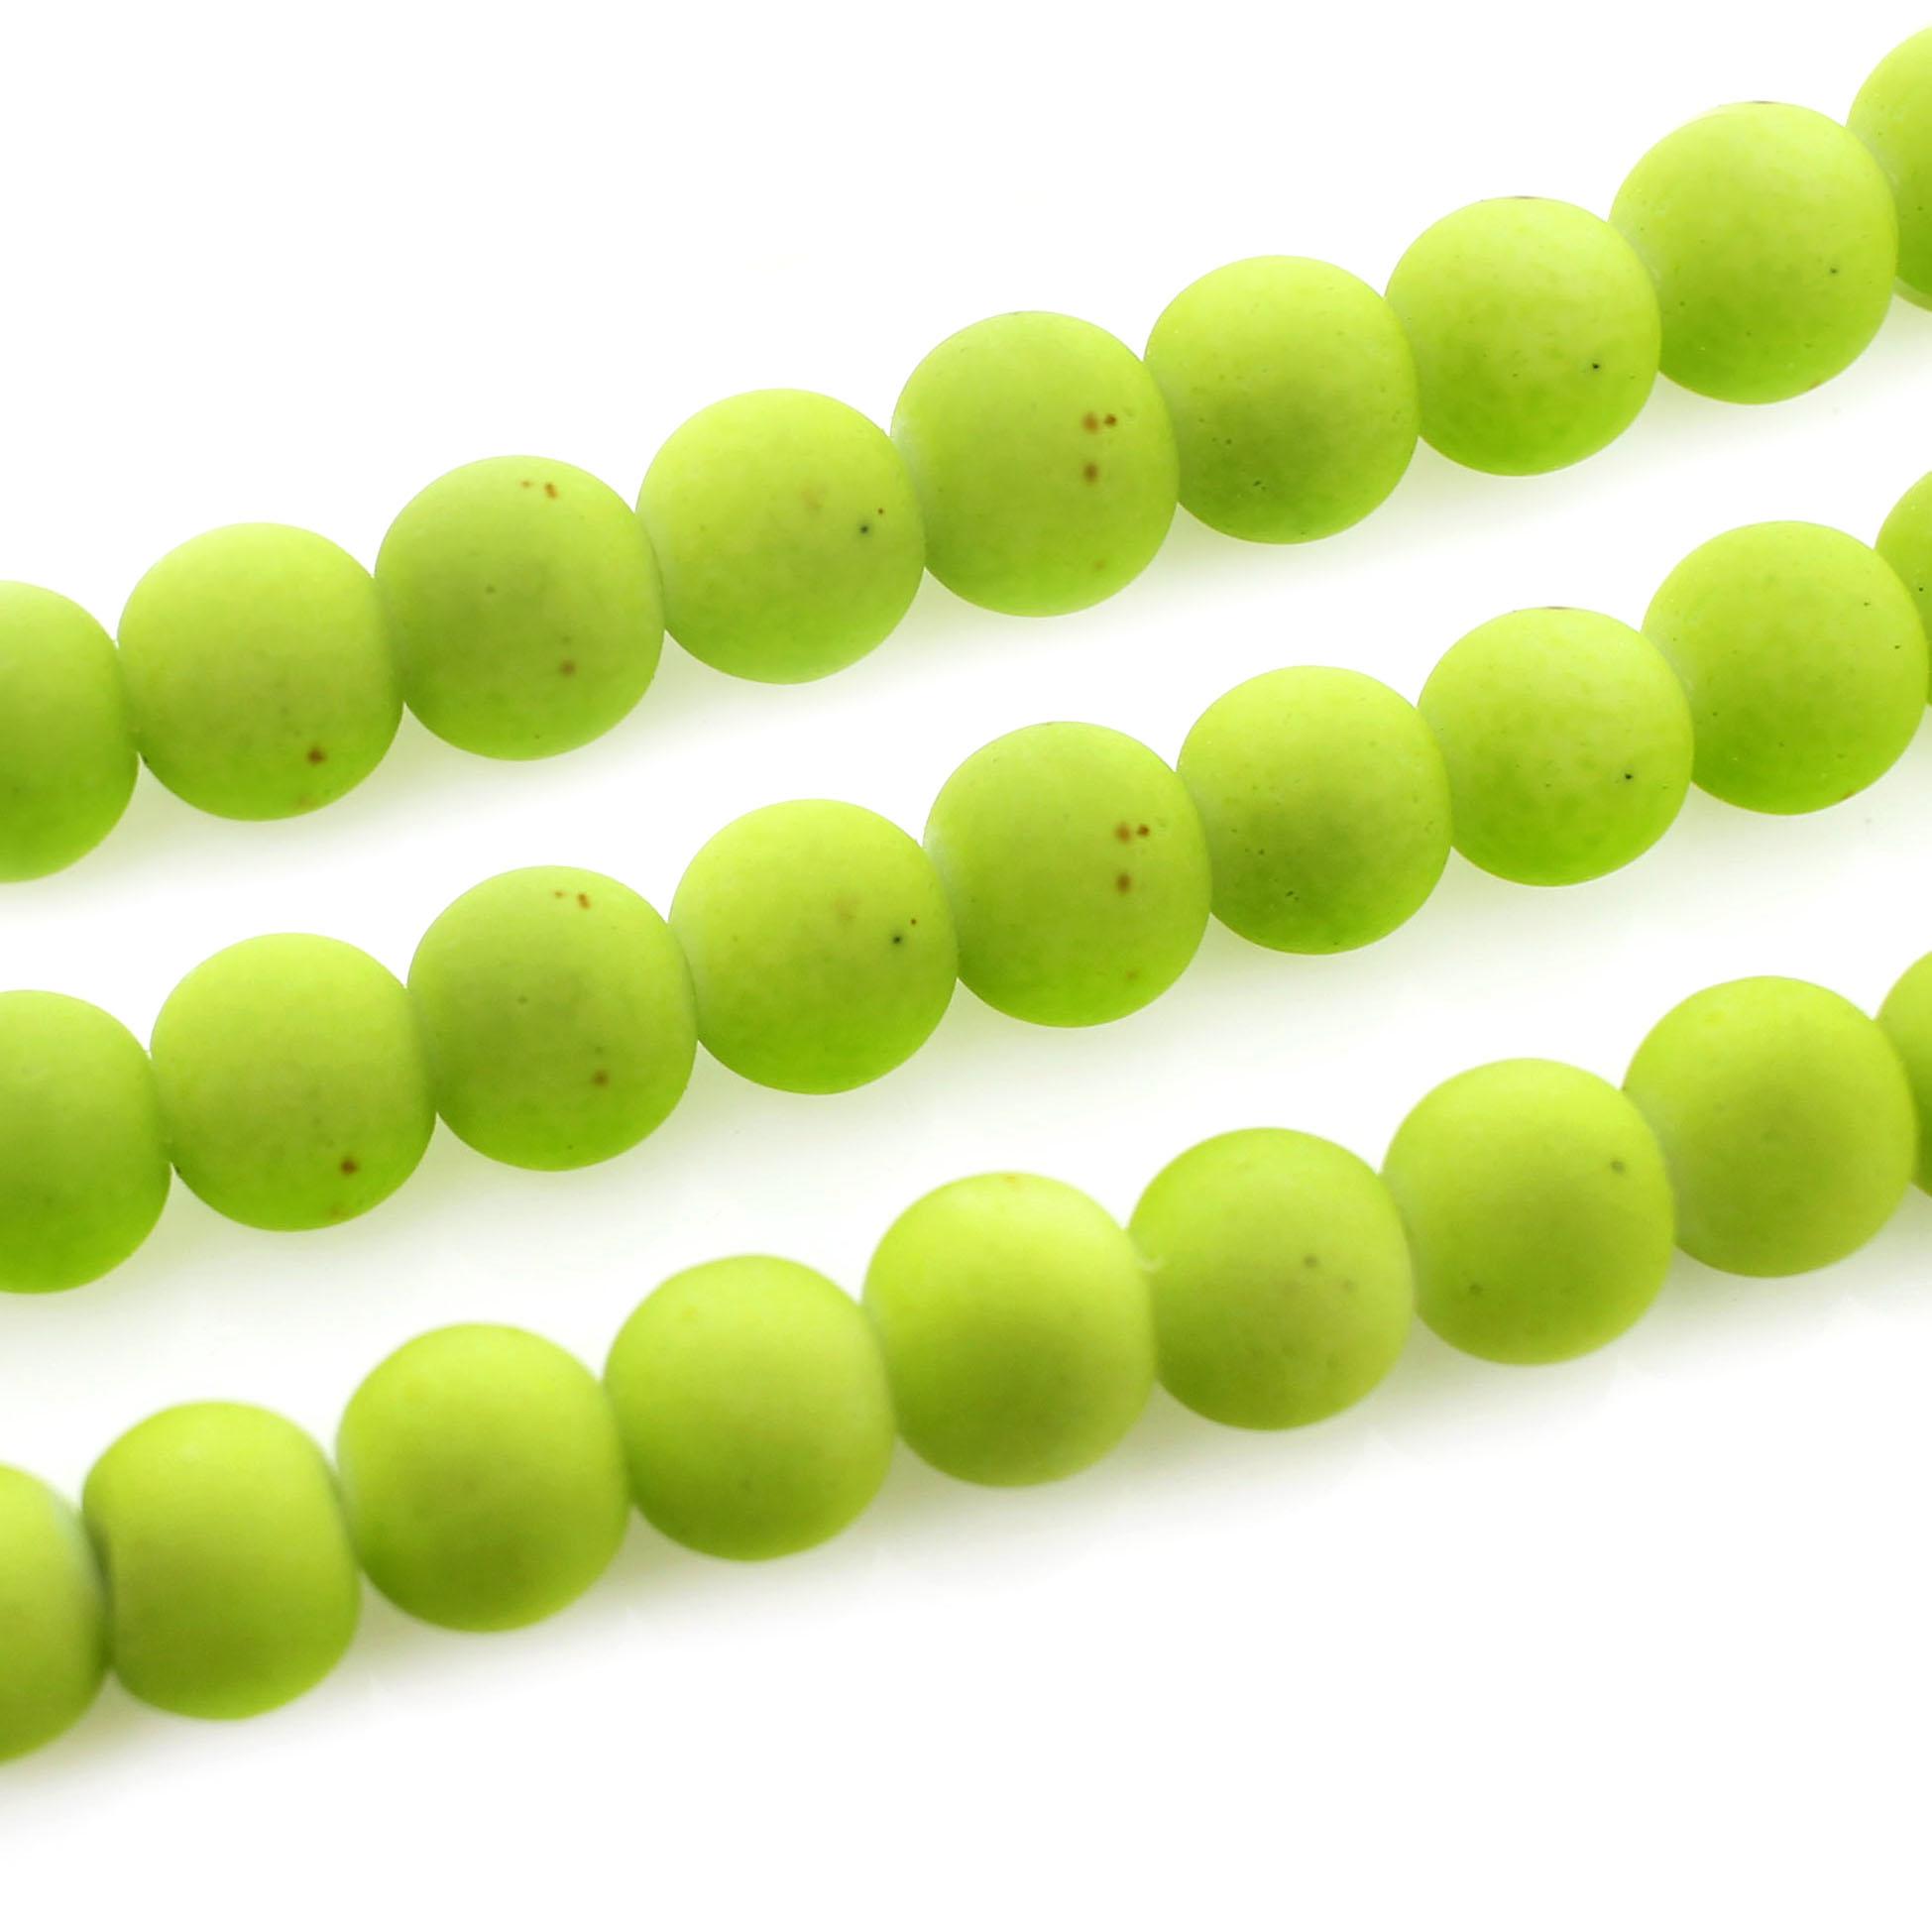 Soft Touch Glass Beads 6mm Round - Lime Green GRADE B